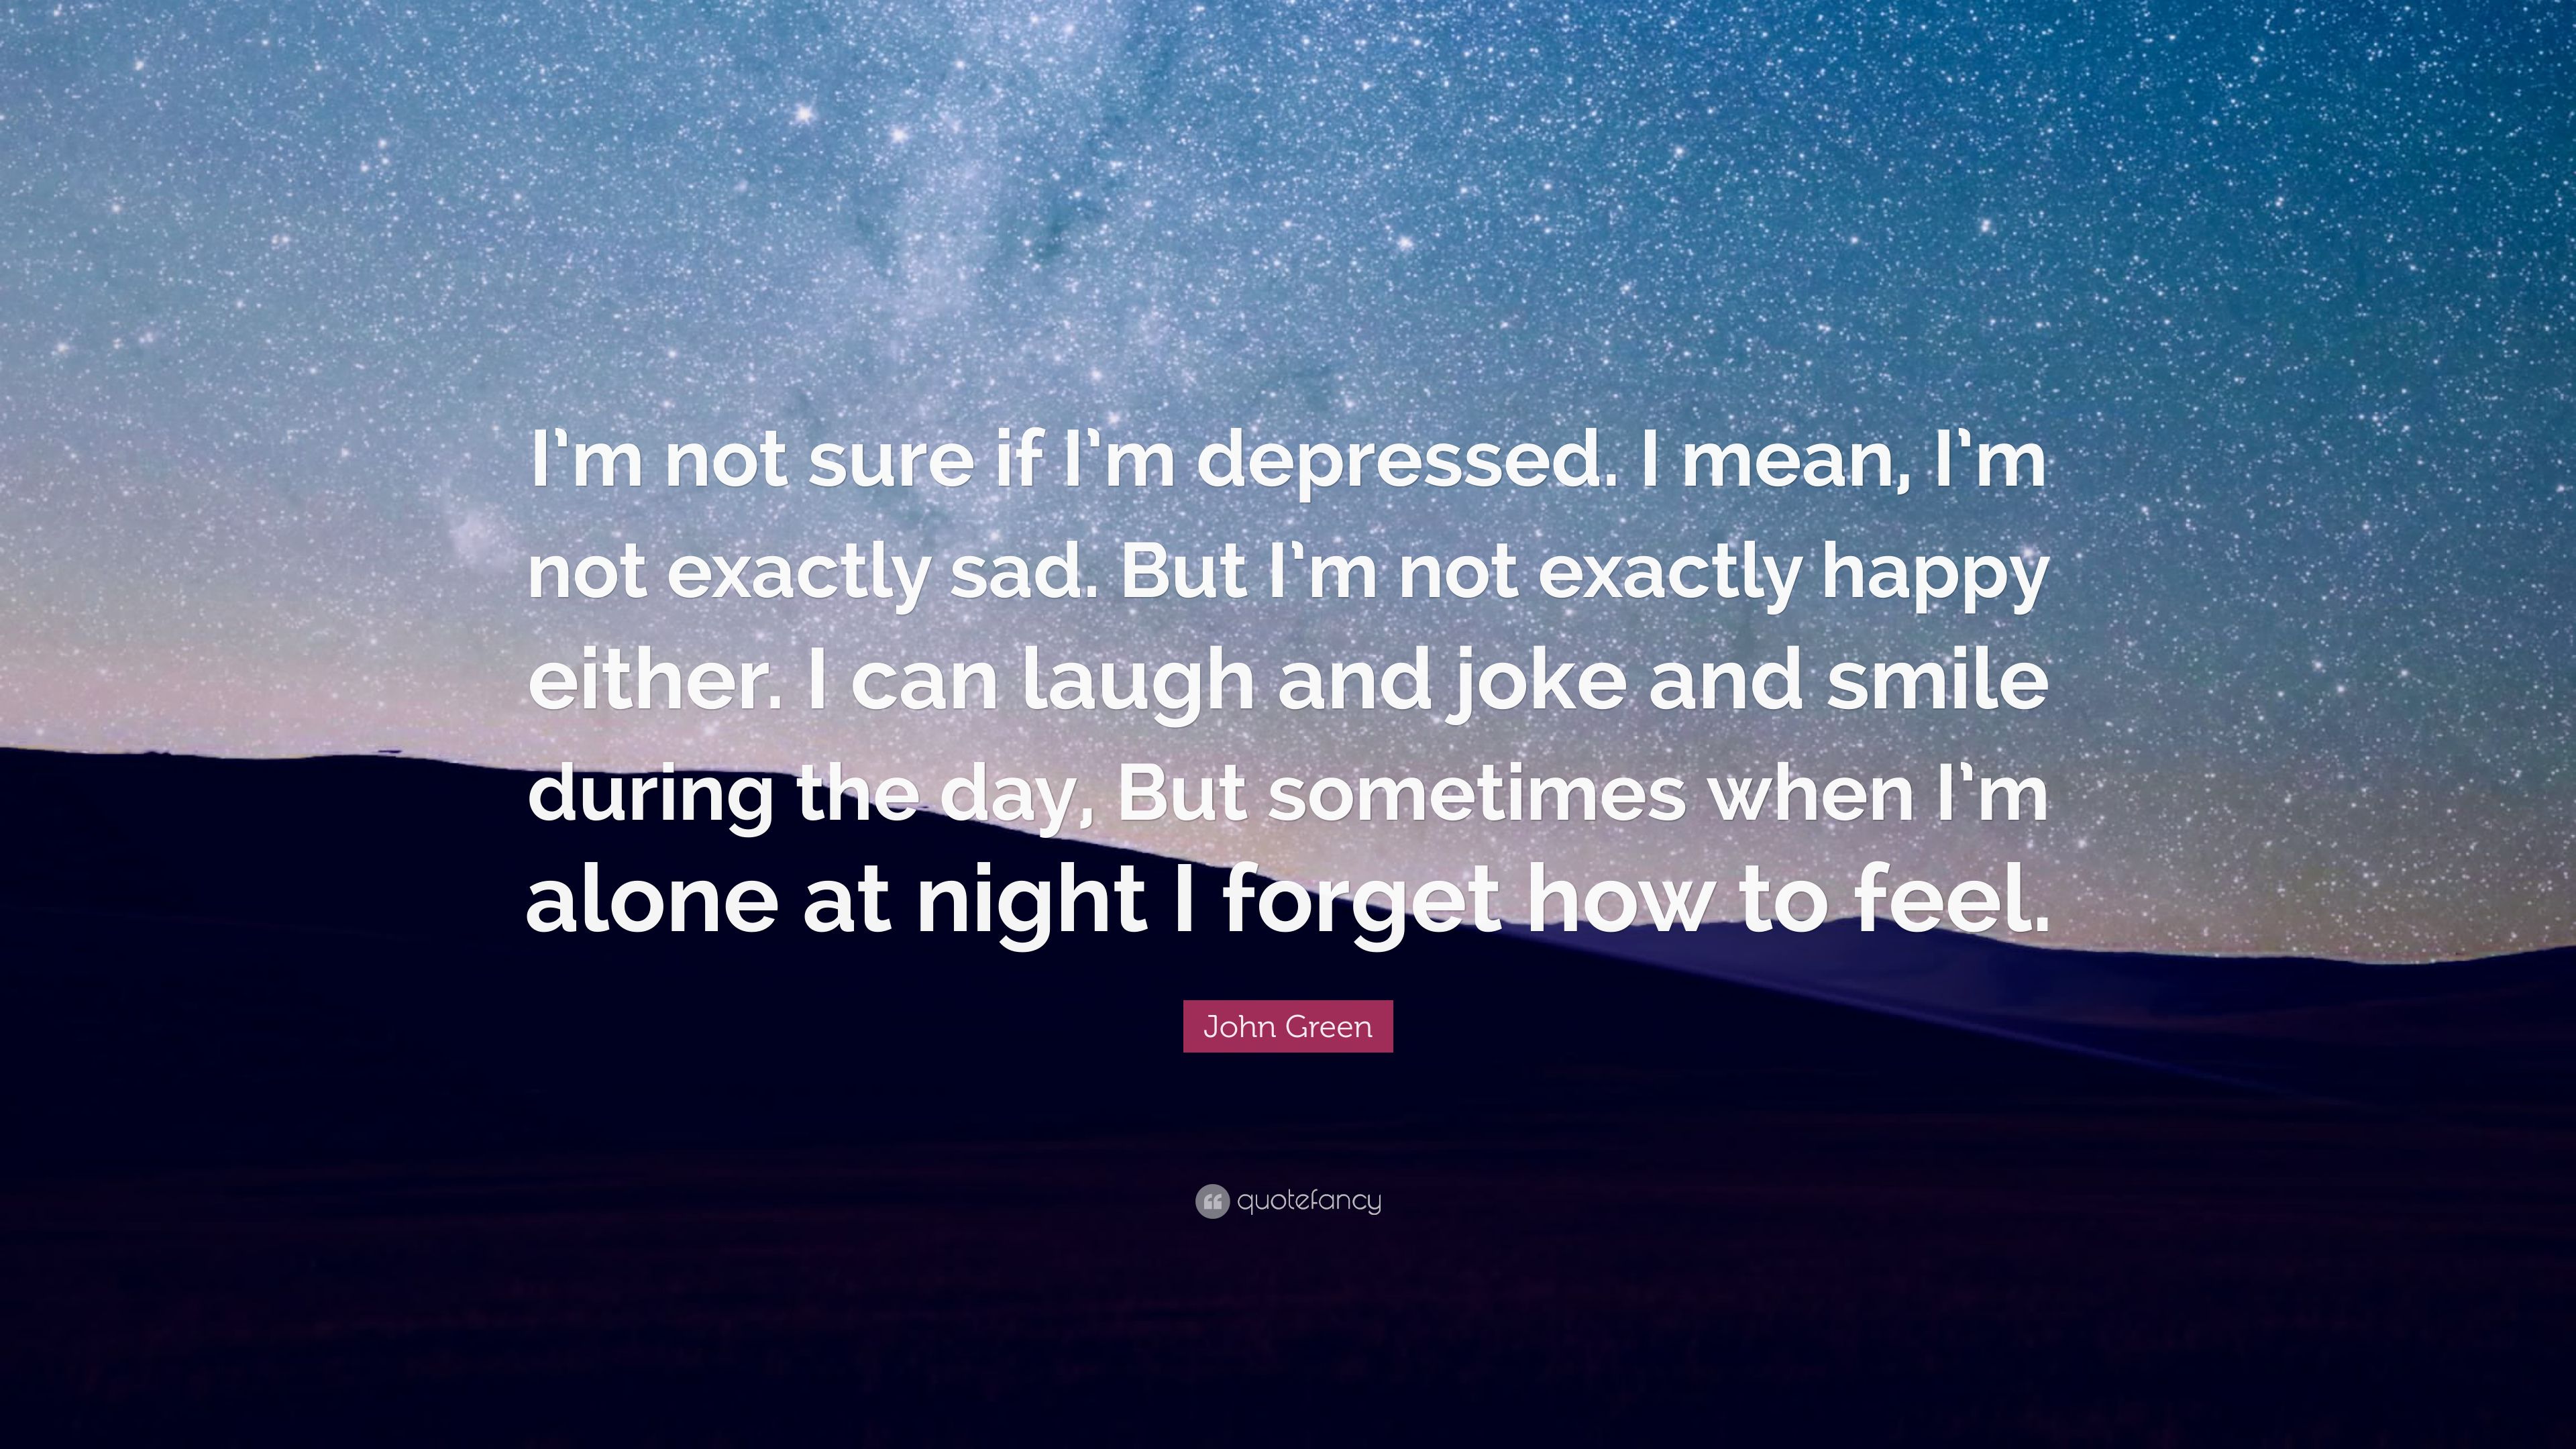 John Green Quote: “I'm not sure if I'm depressed. I mean, I'm not exactly sad. But I'm not exactly happy either. I can laugh and joke and s.”